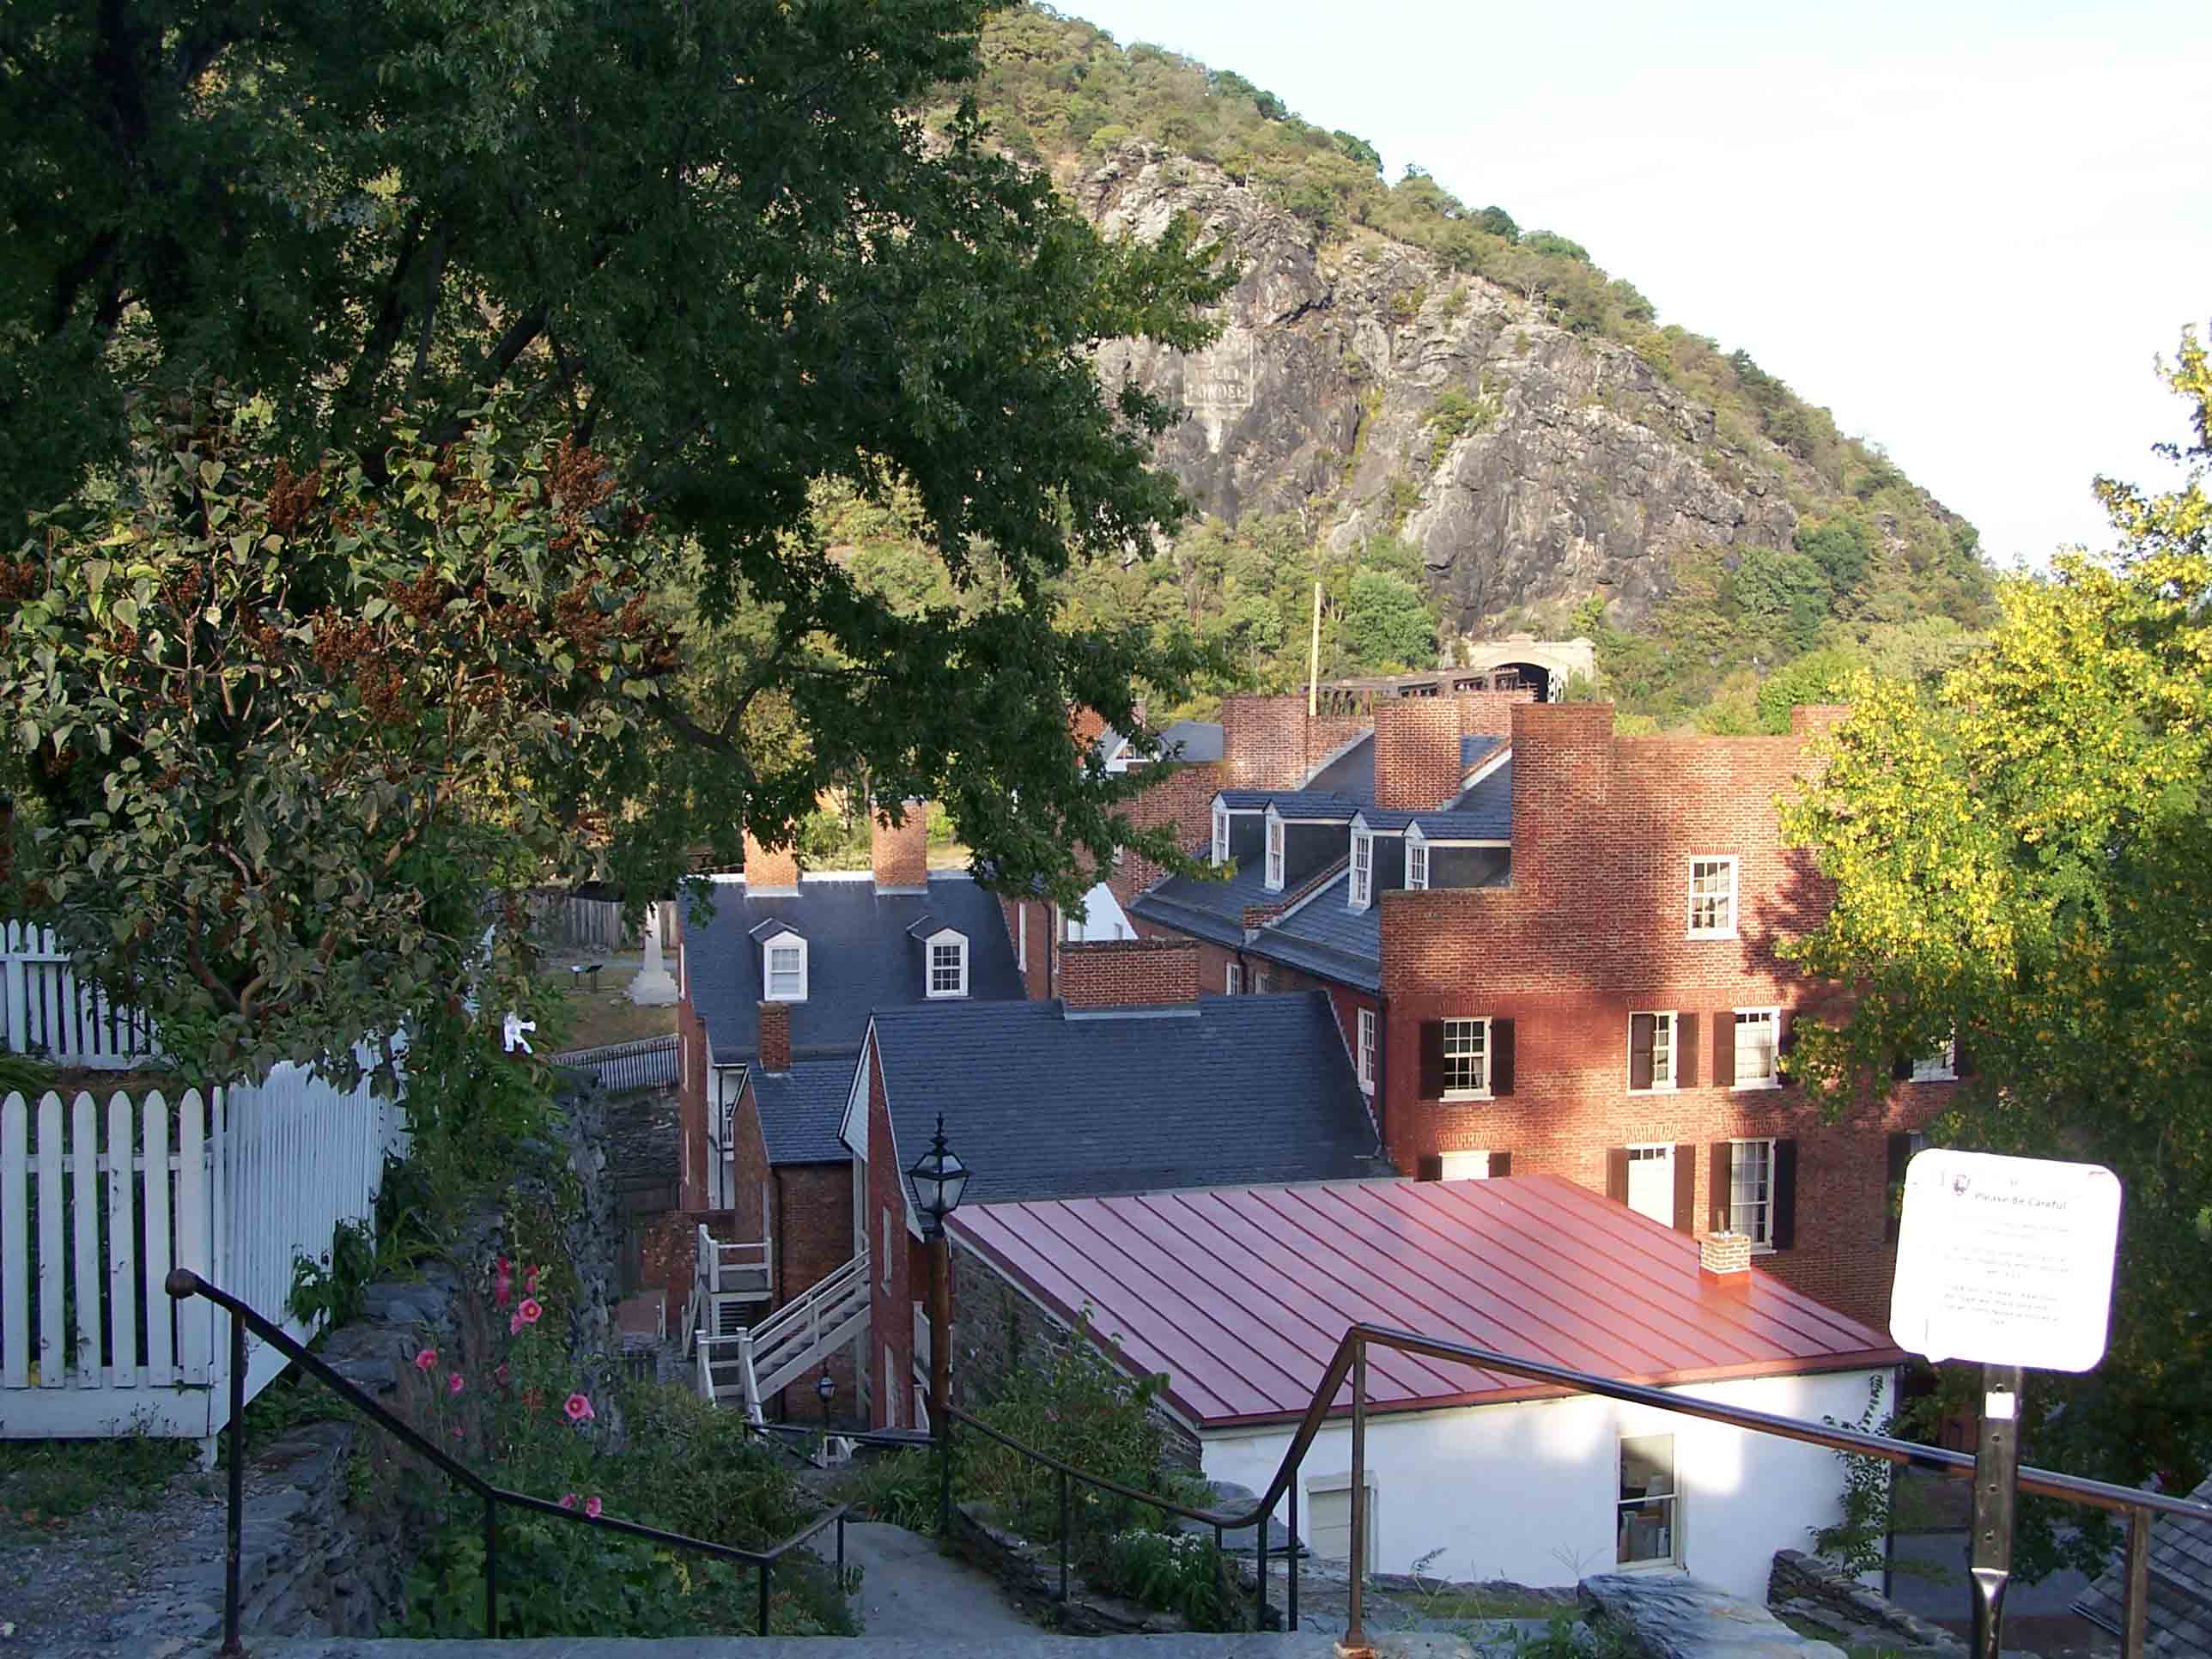 mm 0.1	- View of Harpers Ferry from trail. Courtesy at@rohland.org